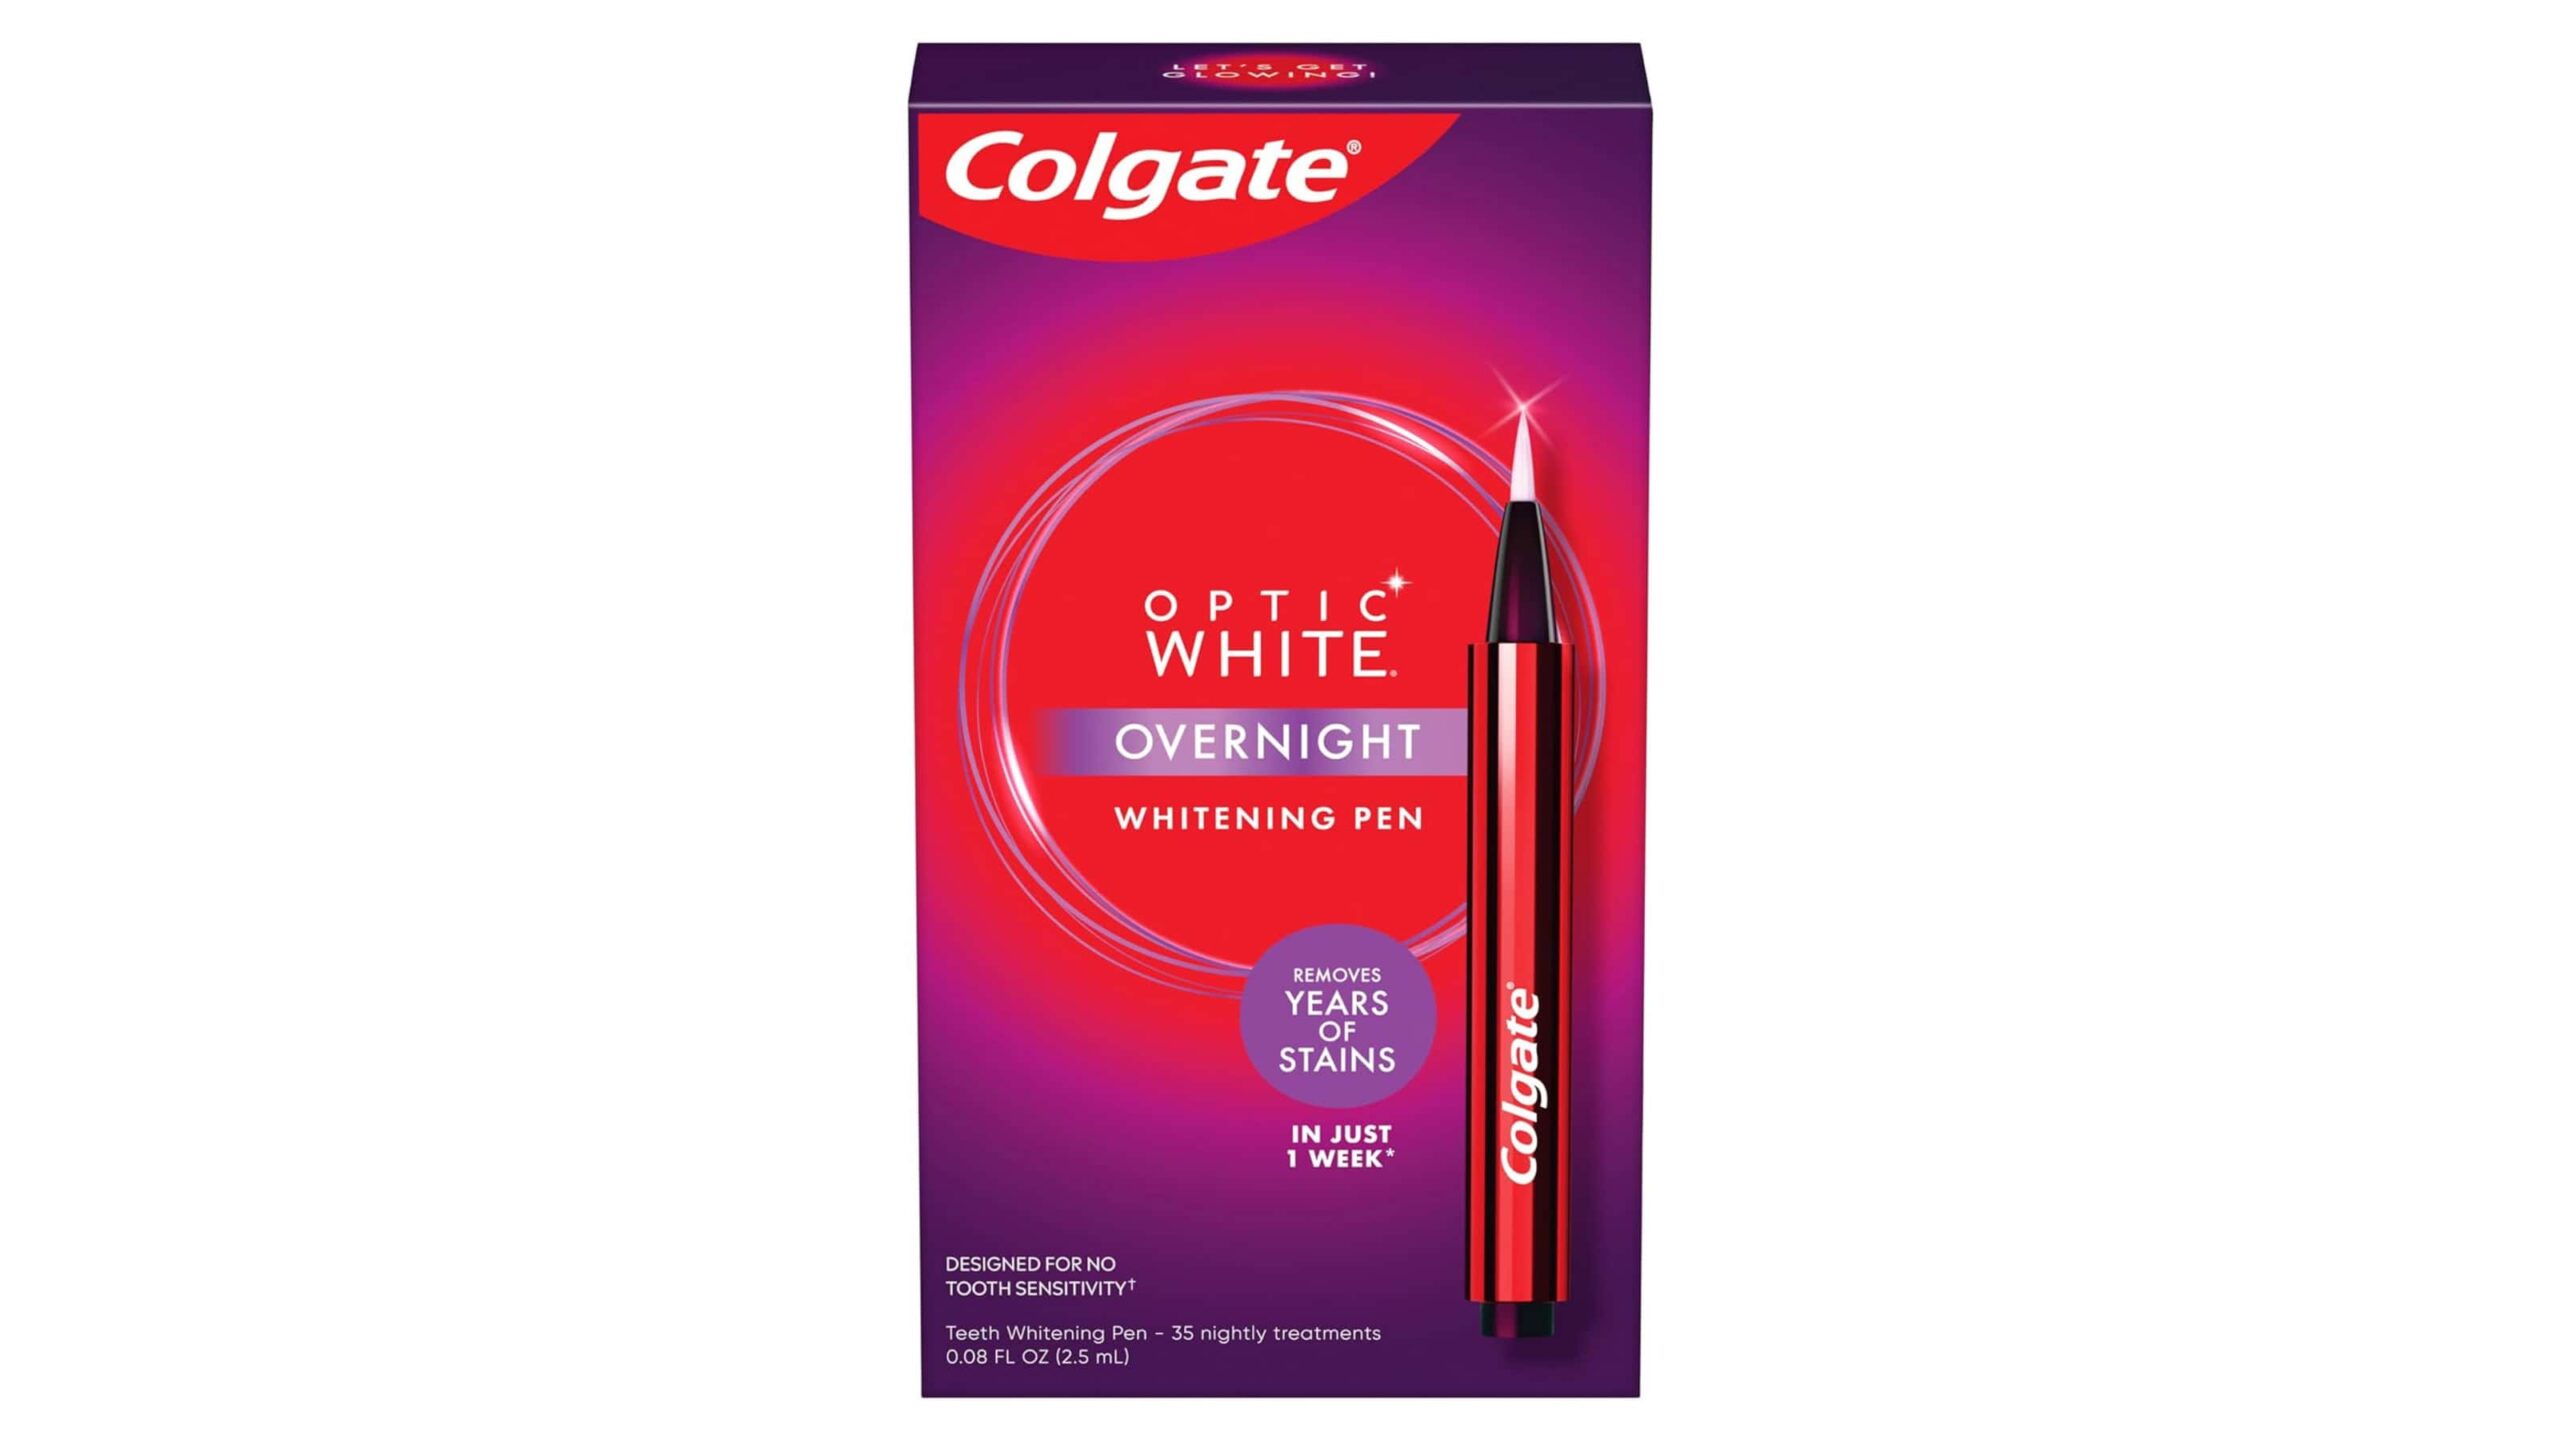 A packet of Colgate Optic White overnight teeth whitening pen, which removes stains and whitens teeth in 35 nightly treatments.